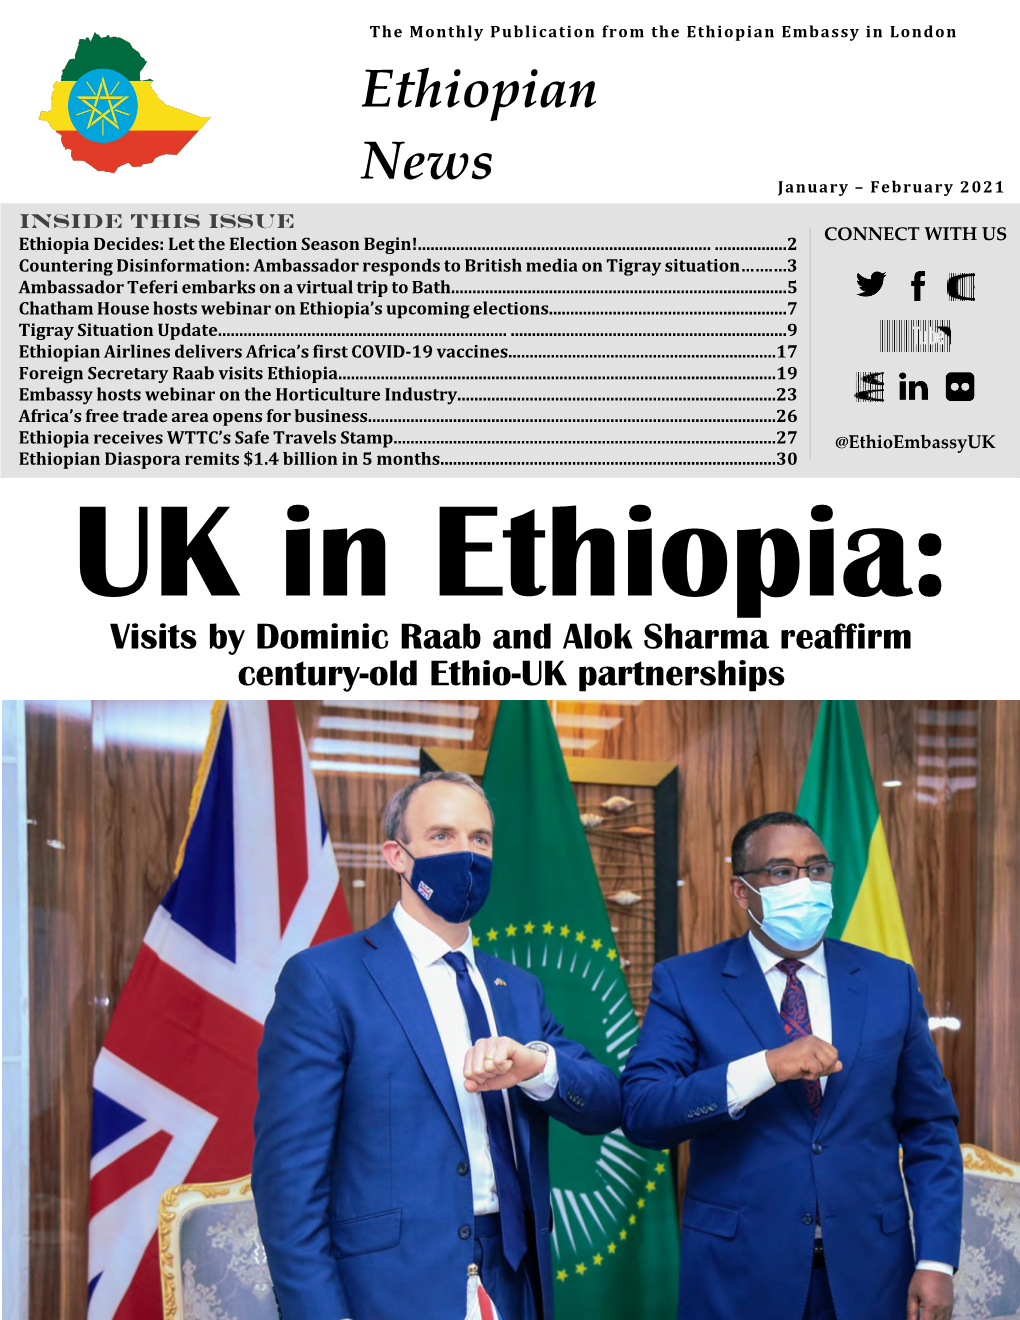 Catch up on the Latest Updates from Ethiopia, and from Our Mission, in Our Monthly Newsletter